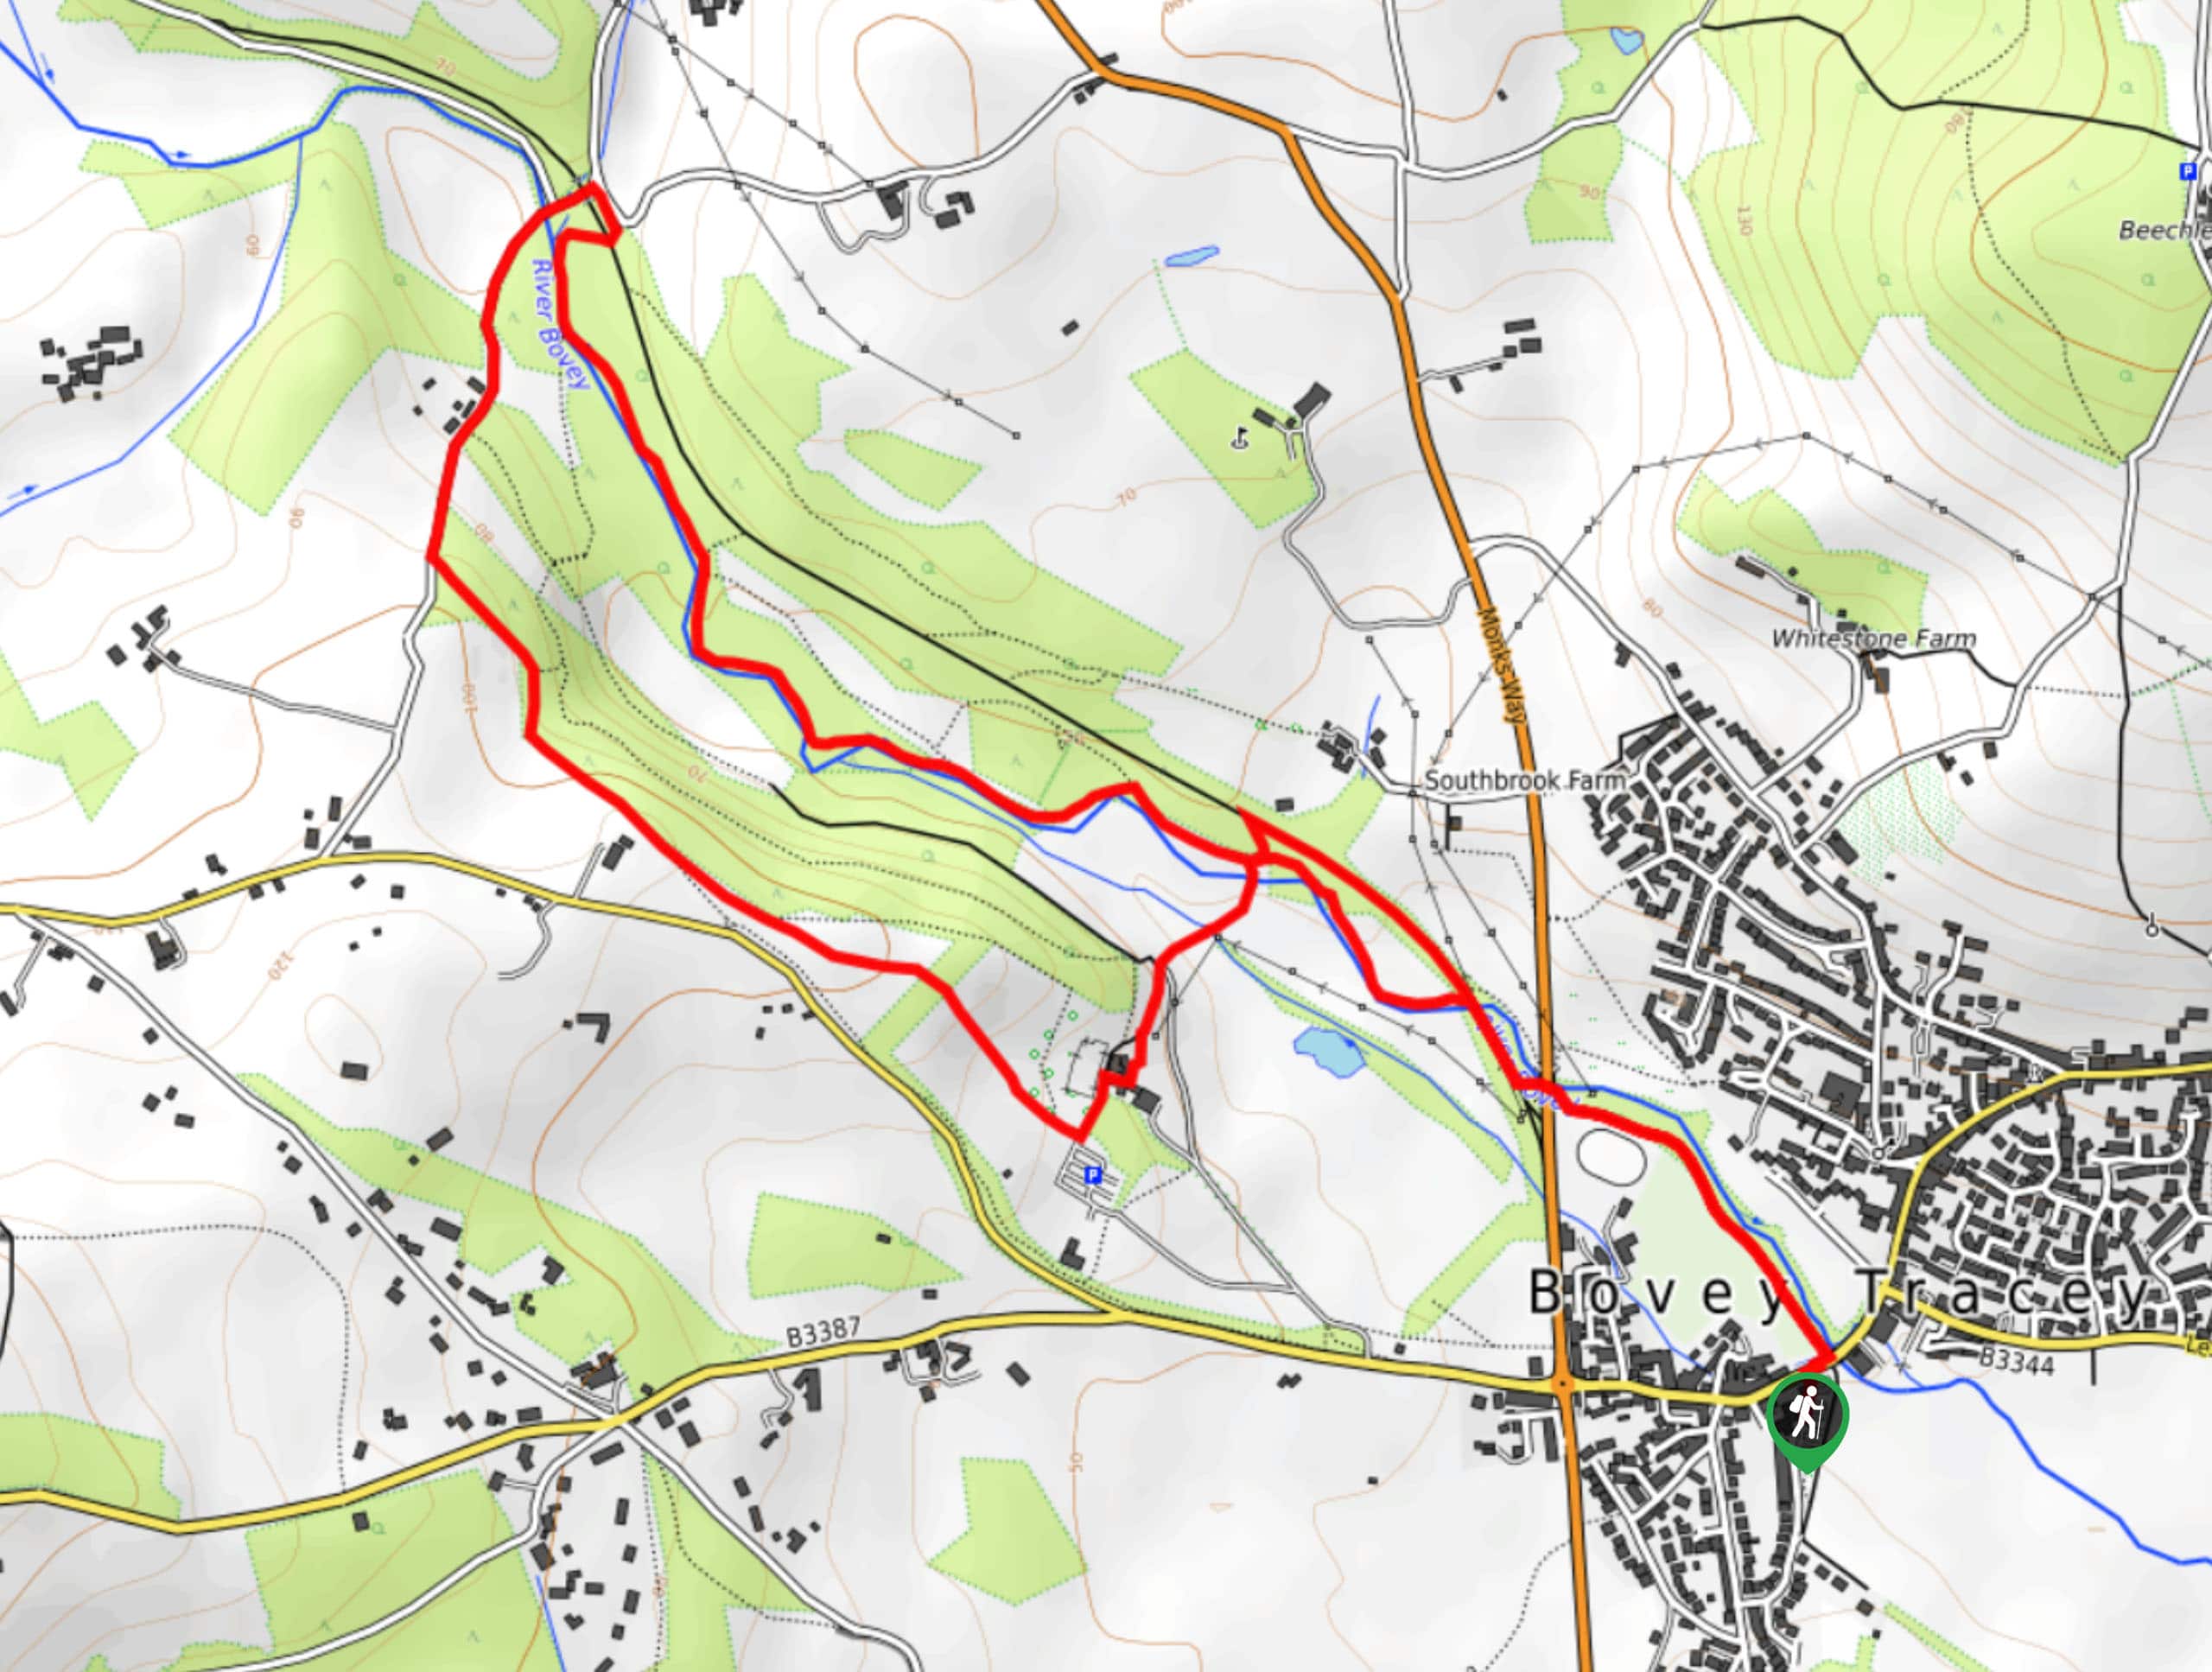 Bovey Tracey and Parke Estate Circular Walk Map